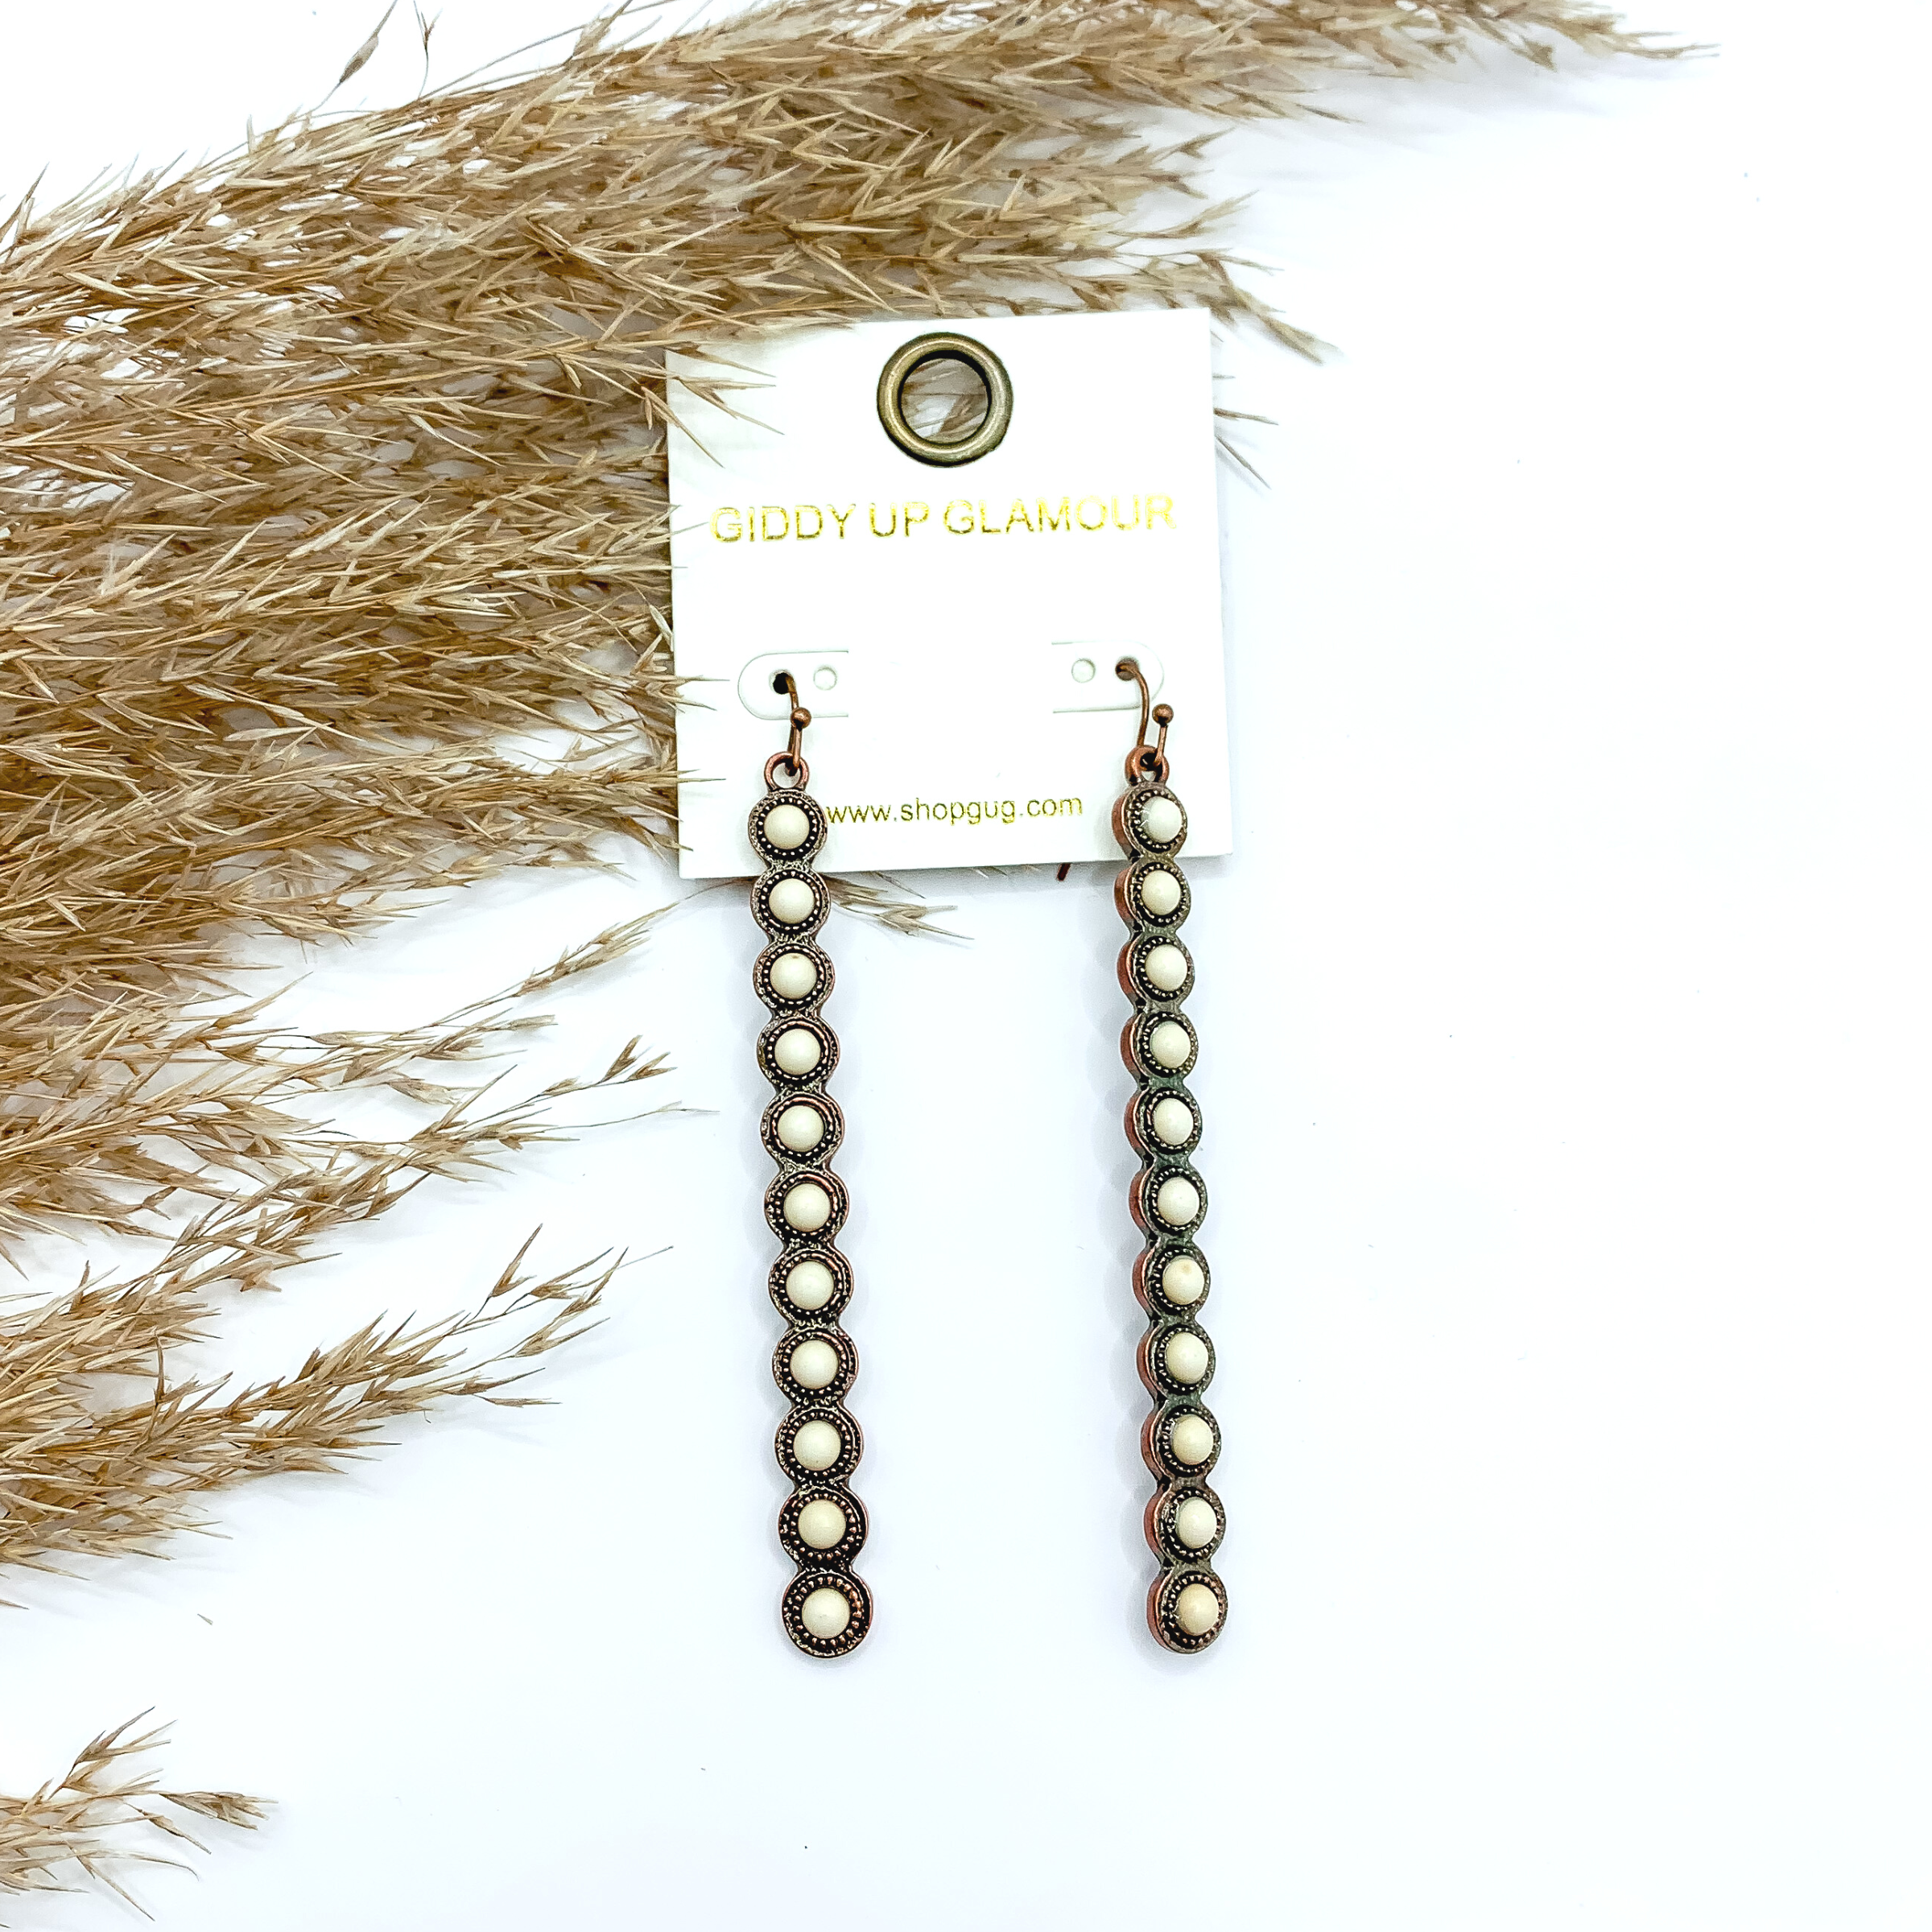 White Studded Long Rectangle Earrings in Copper Tone - Giddy Up Glamour Boutique